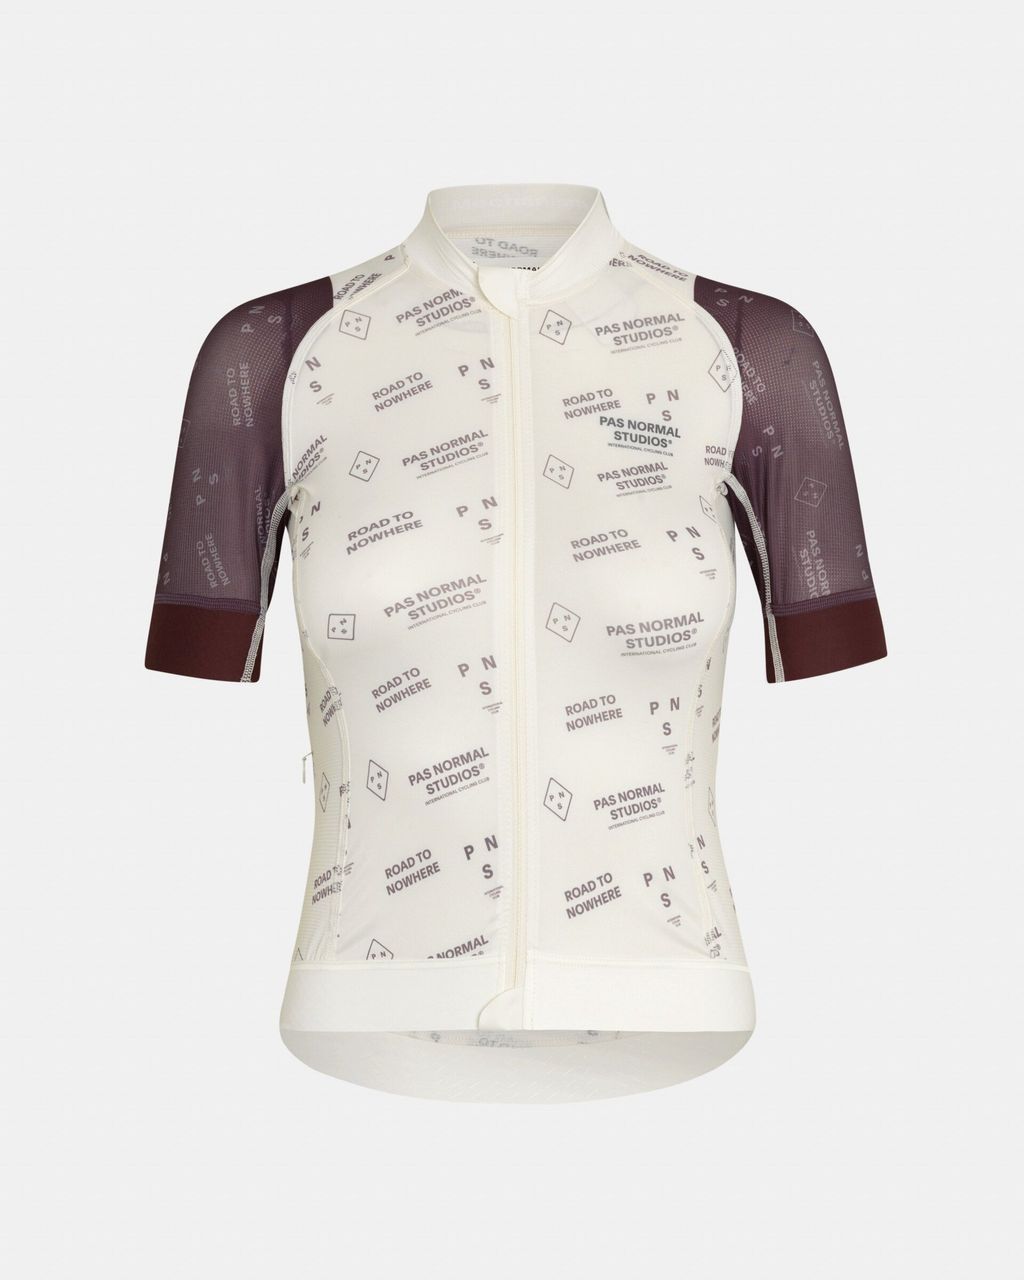 Womens-Mechanism-Late-Drop-Jersey-Off-White-Contrast_Front-pdp-page